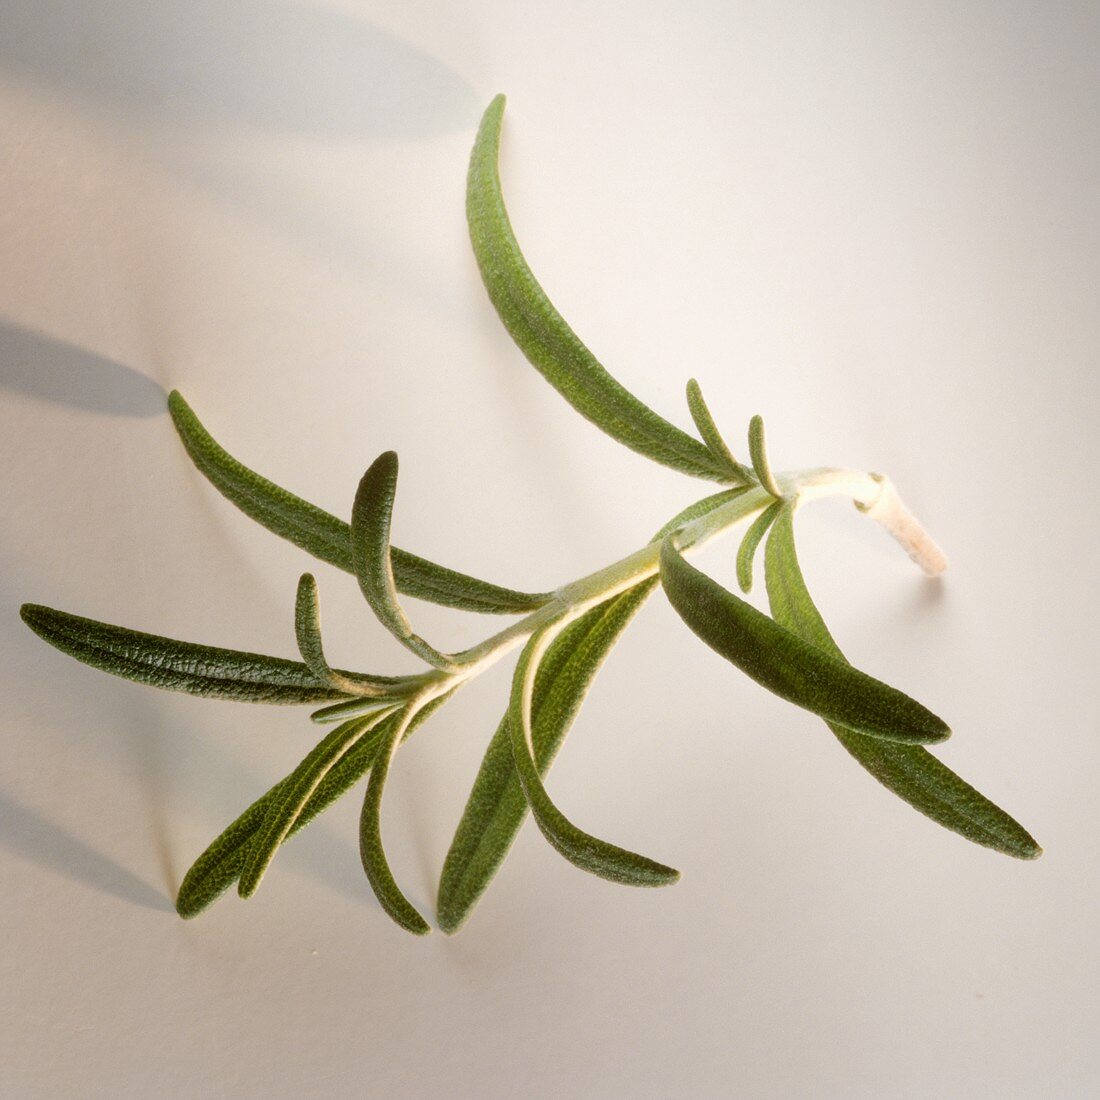 A sprig of rosemary on light background